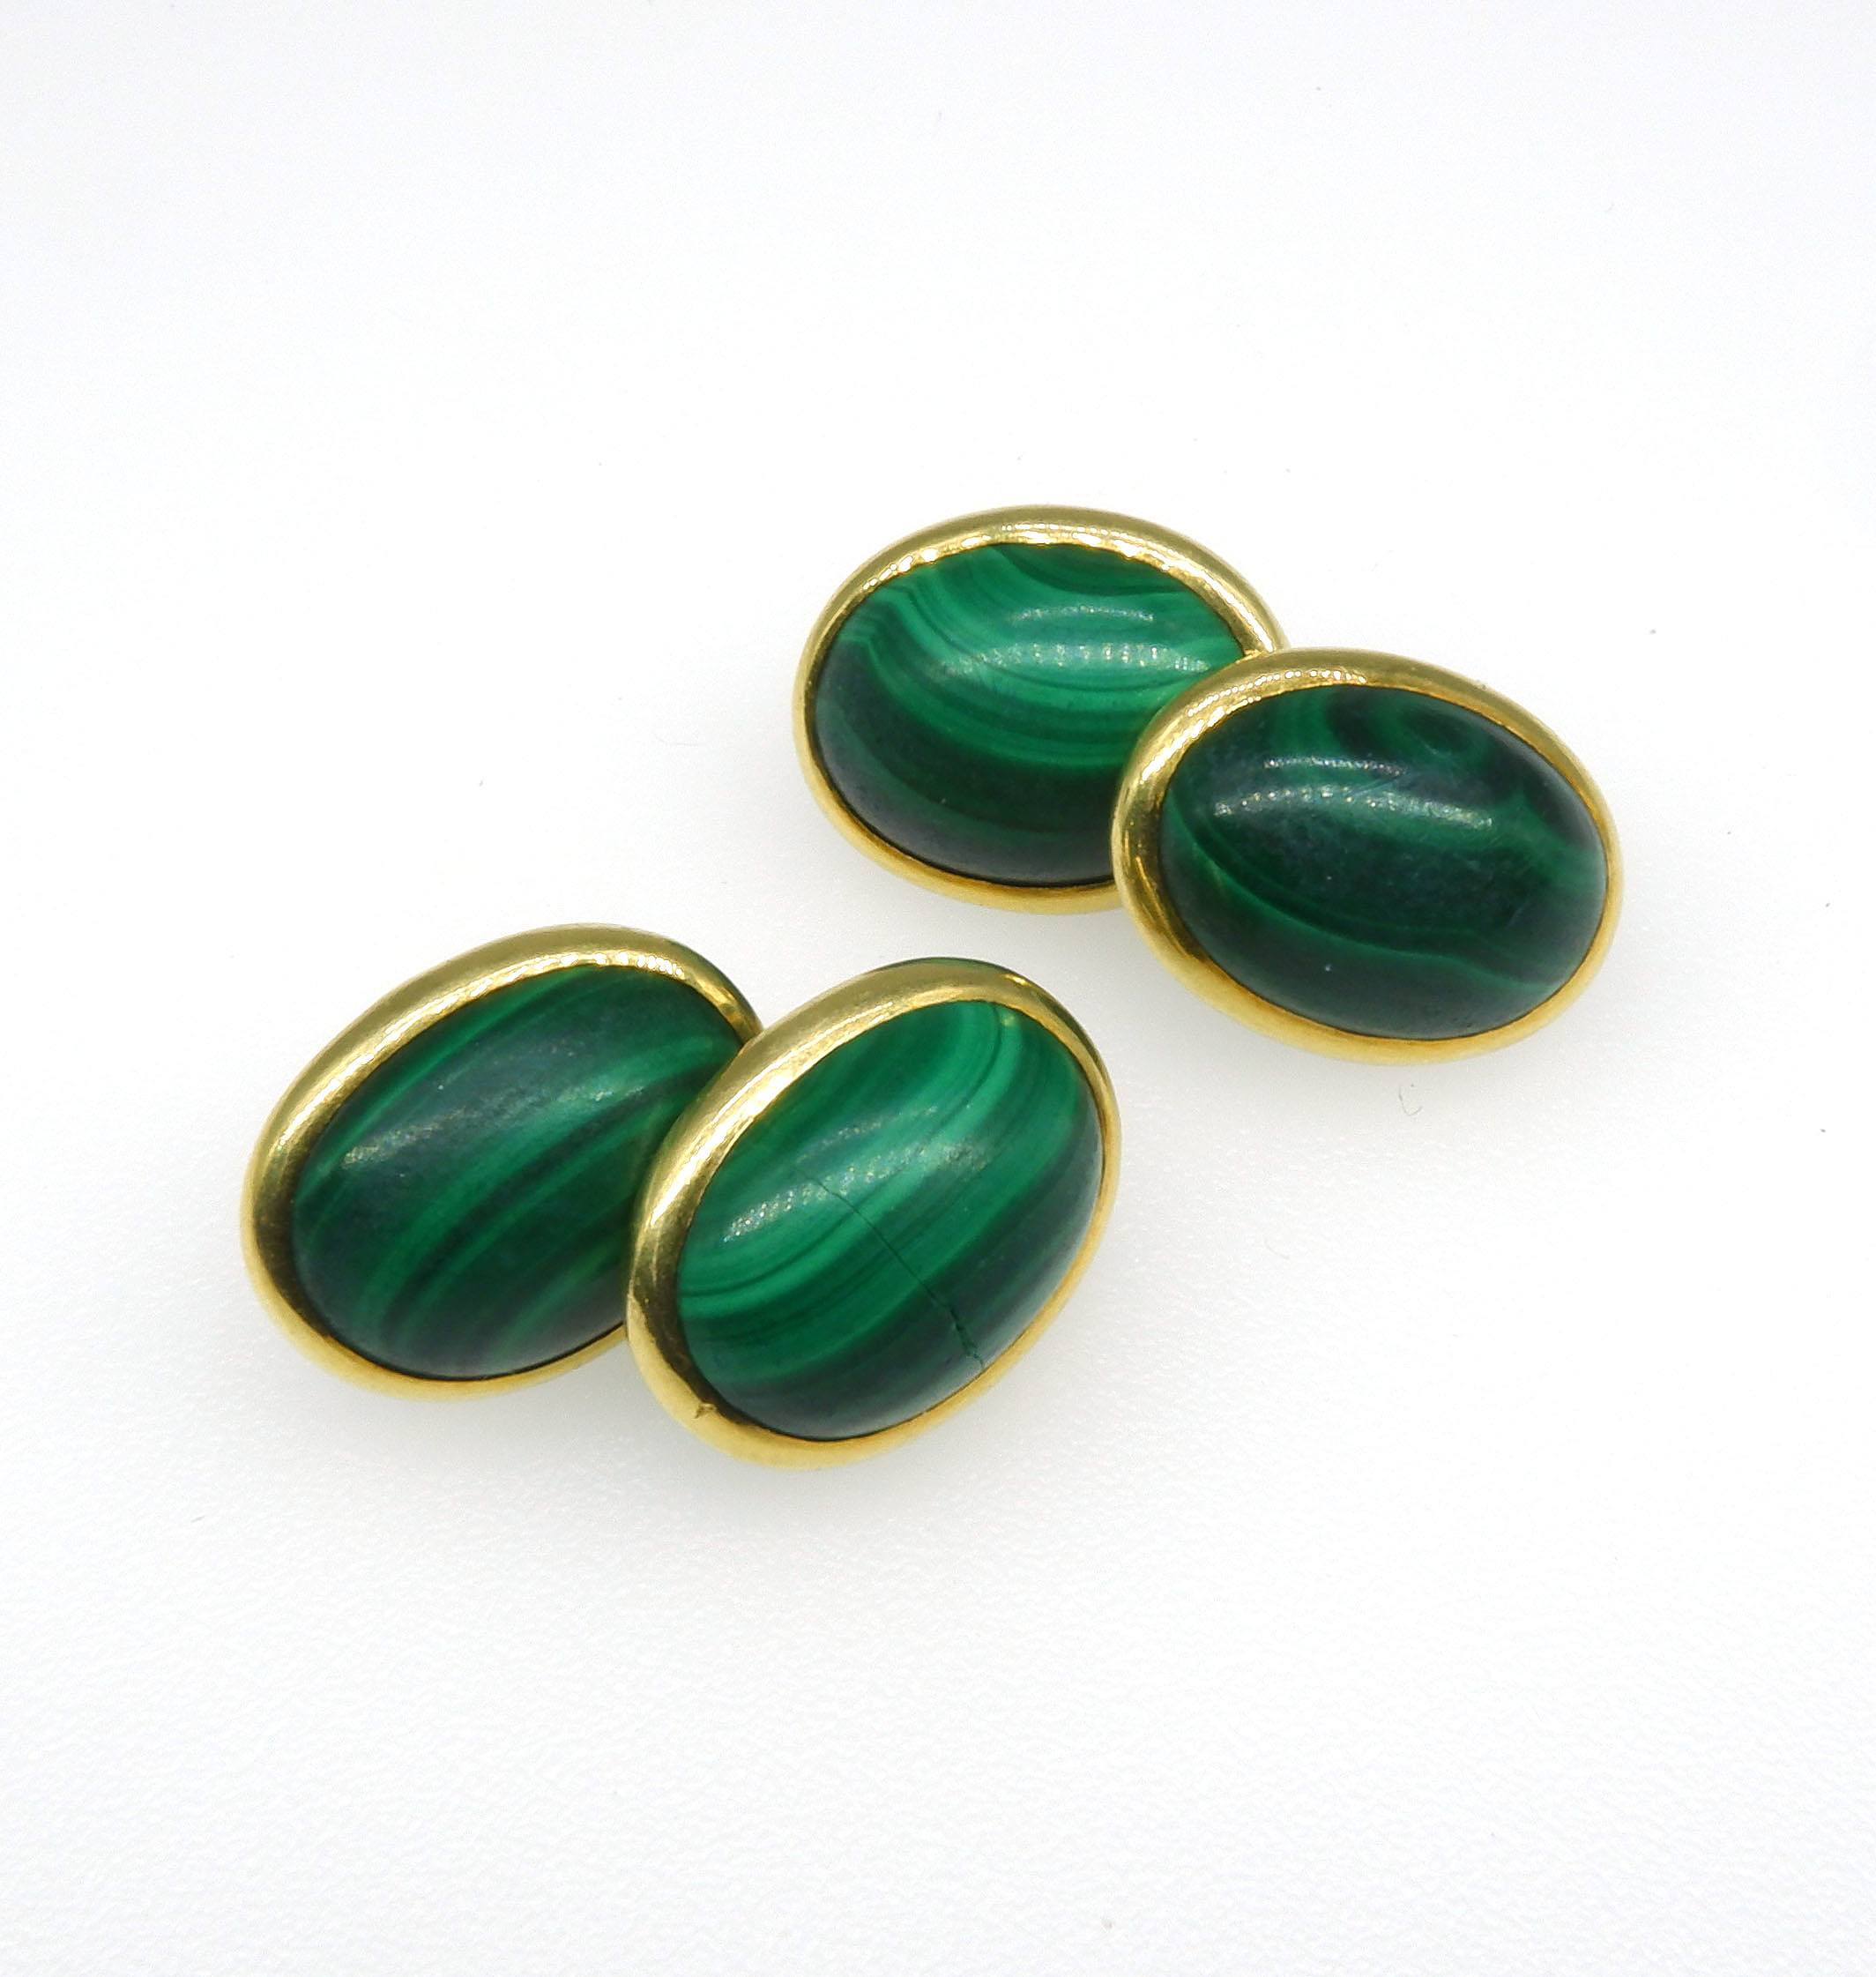 '14ct Yellow Gold Double Ended Cufflinks with Malachite Cabochons in Bezel Setting'